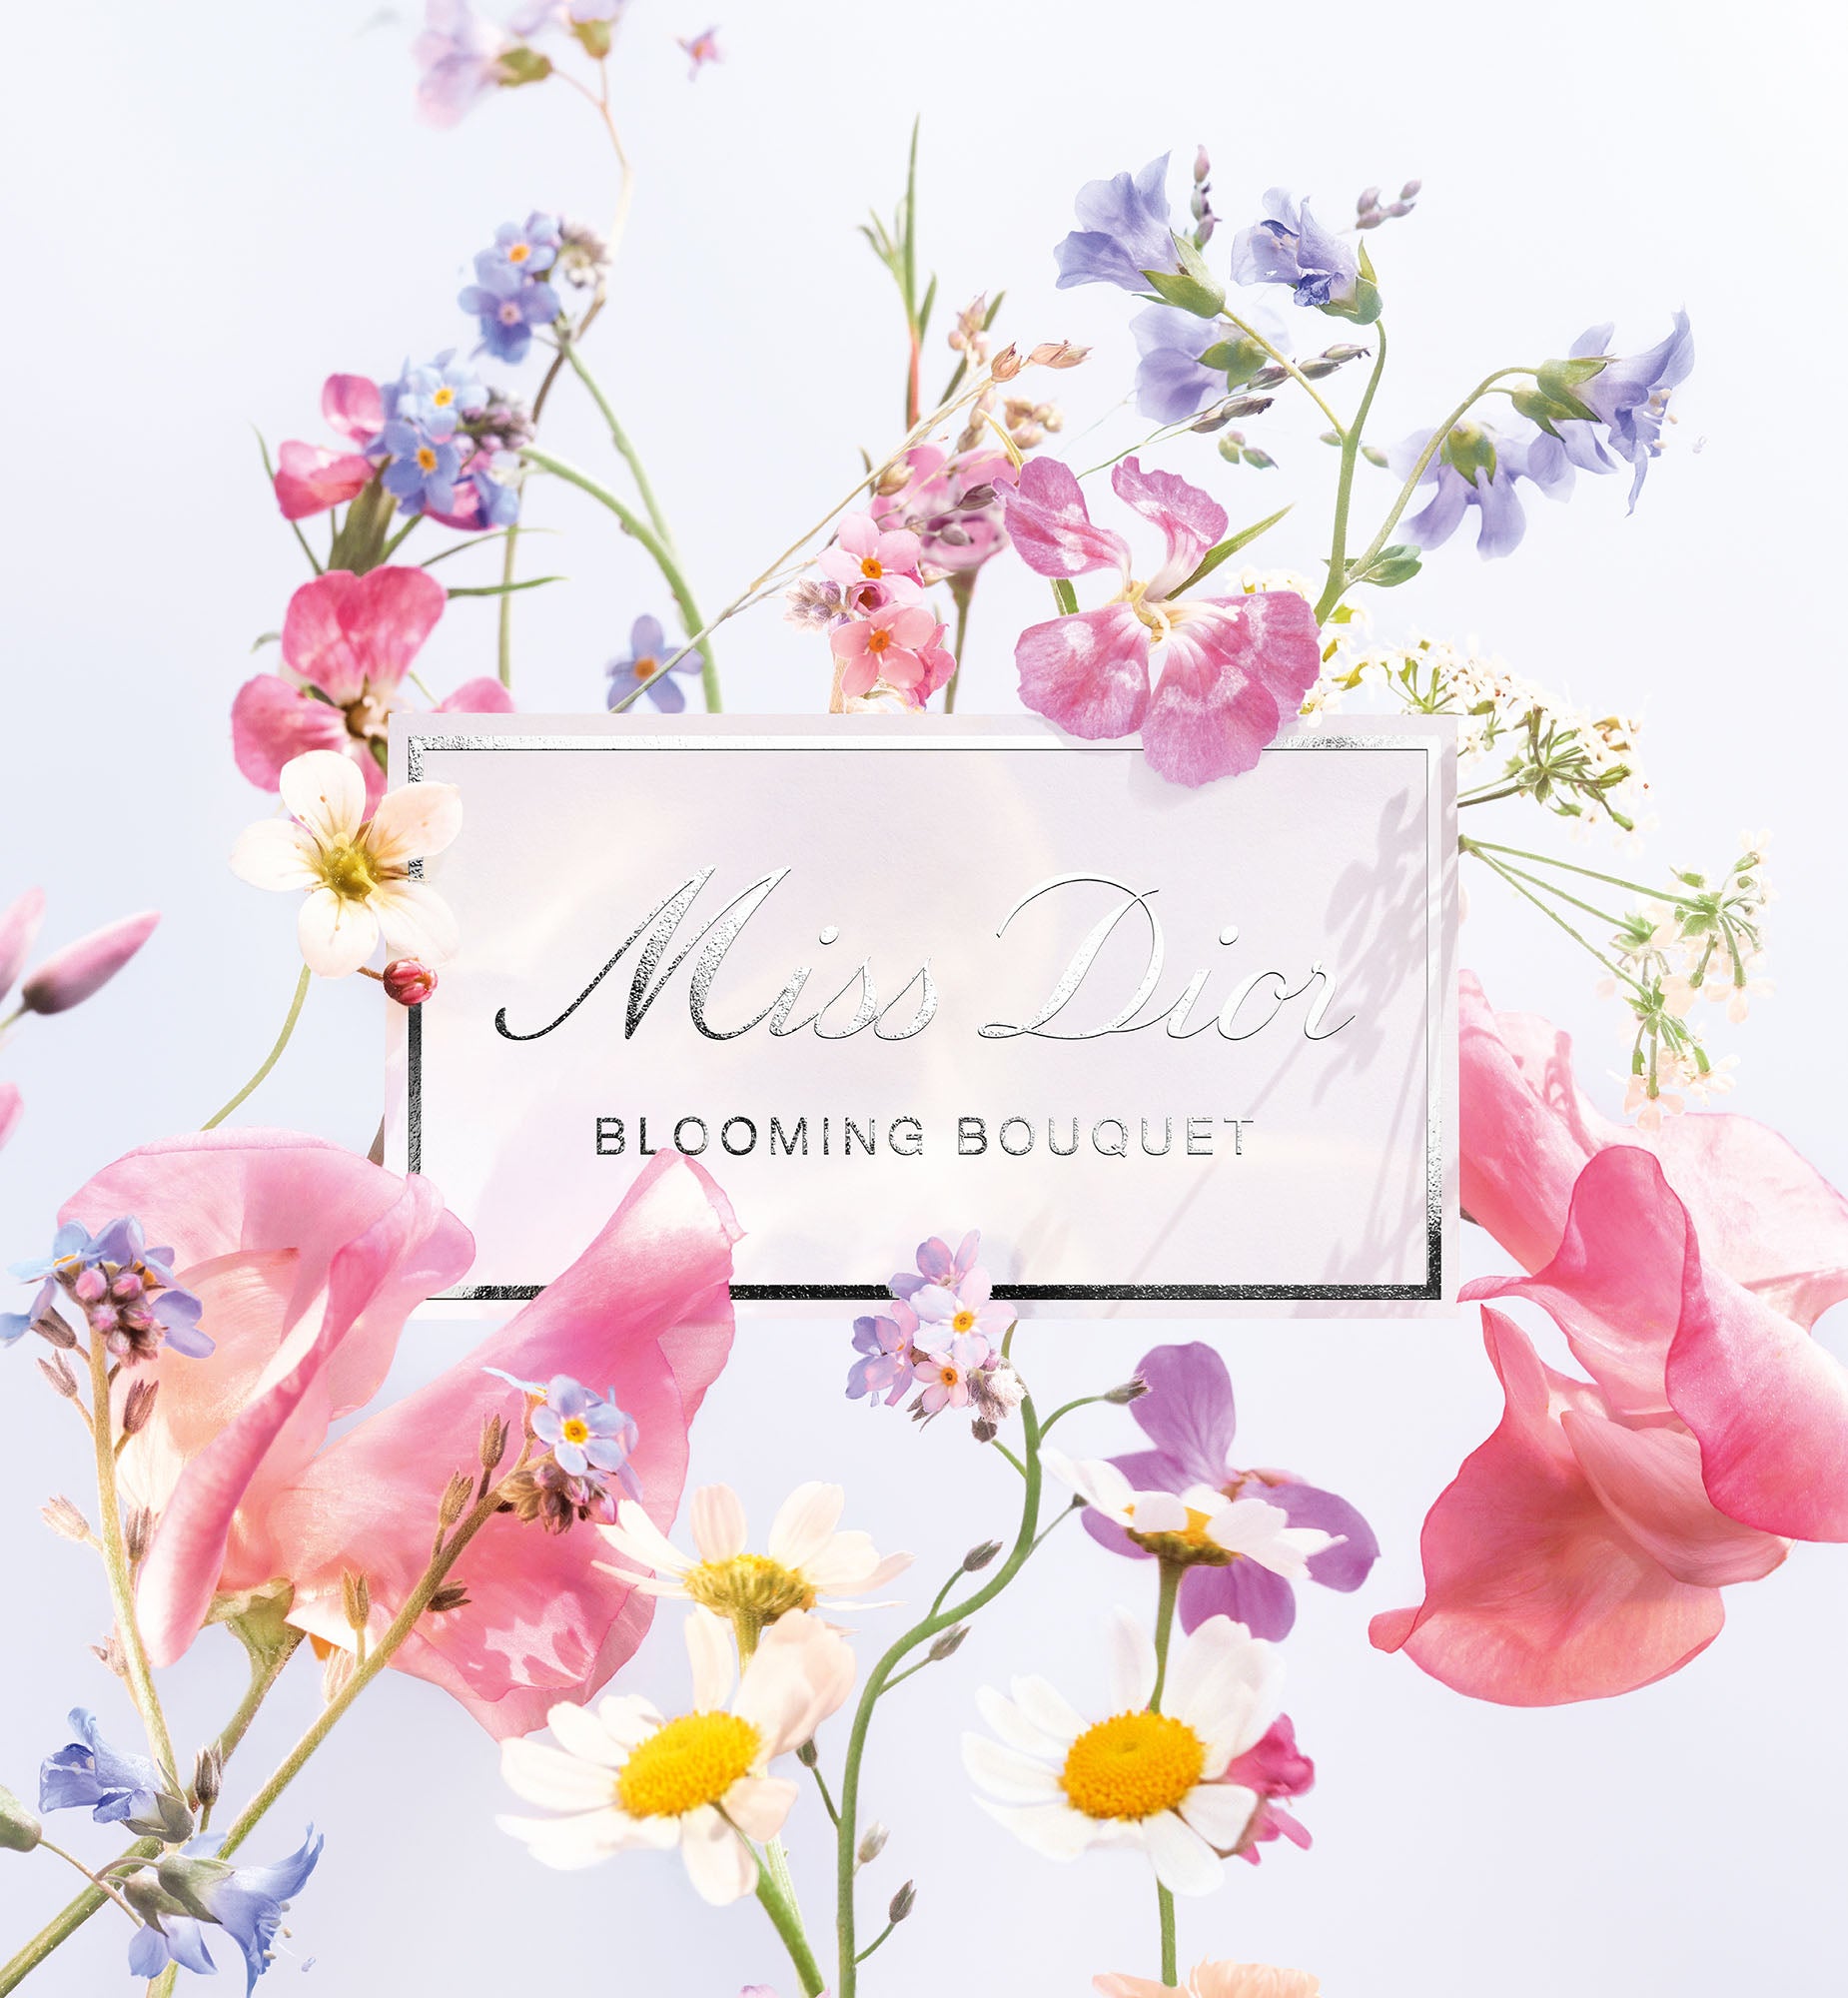 the Miss Dior Blooming Bouquet logo with flowers